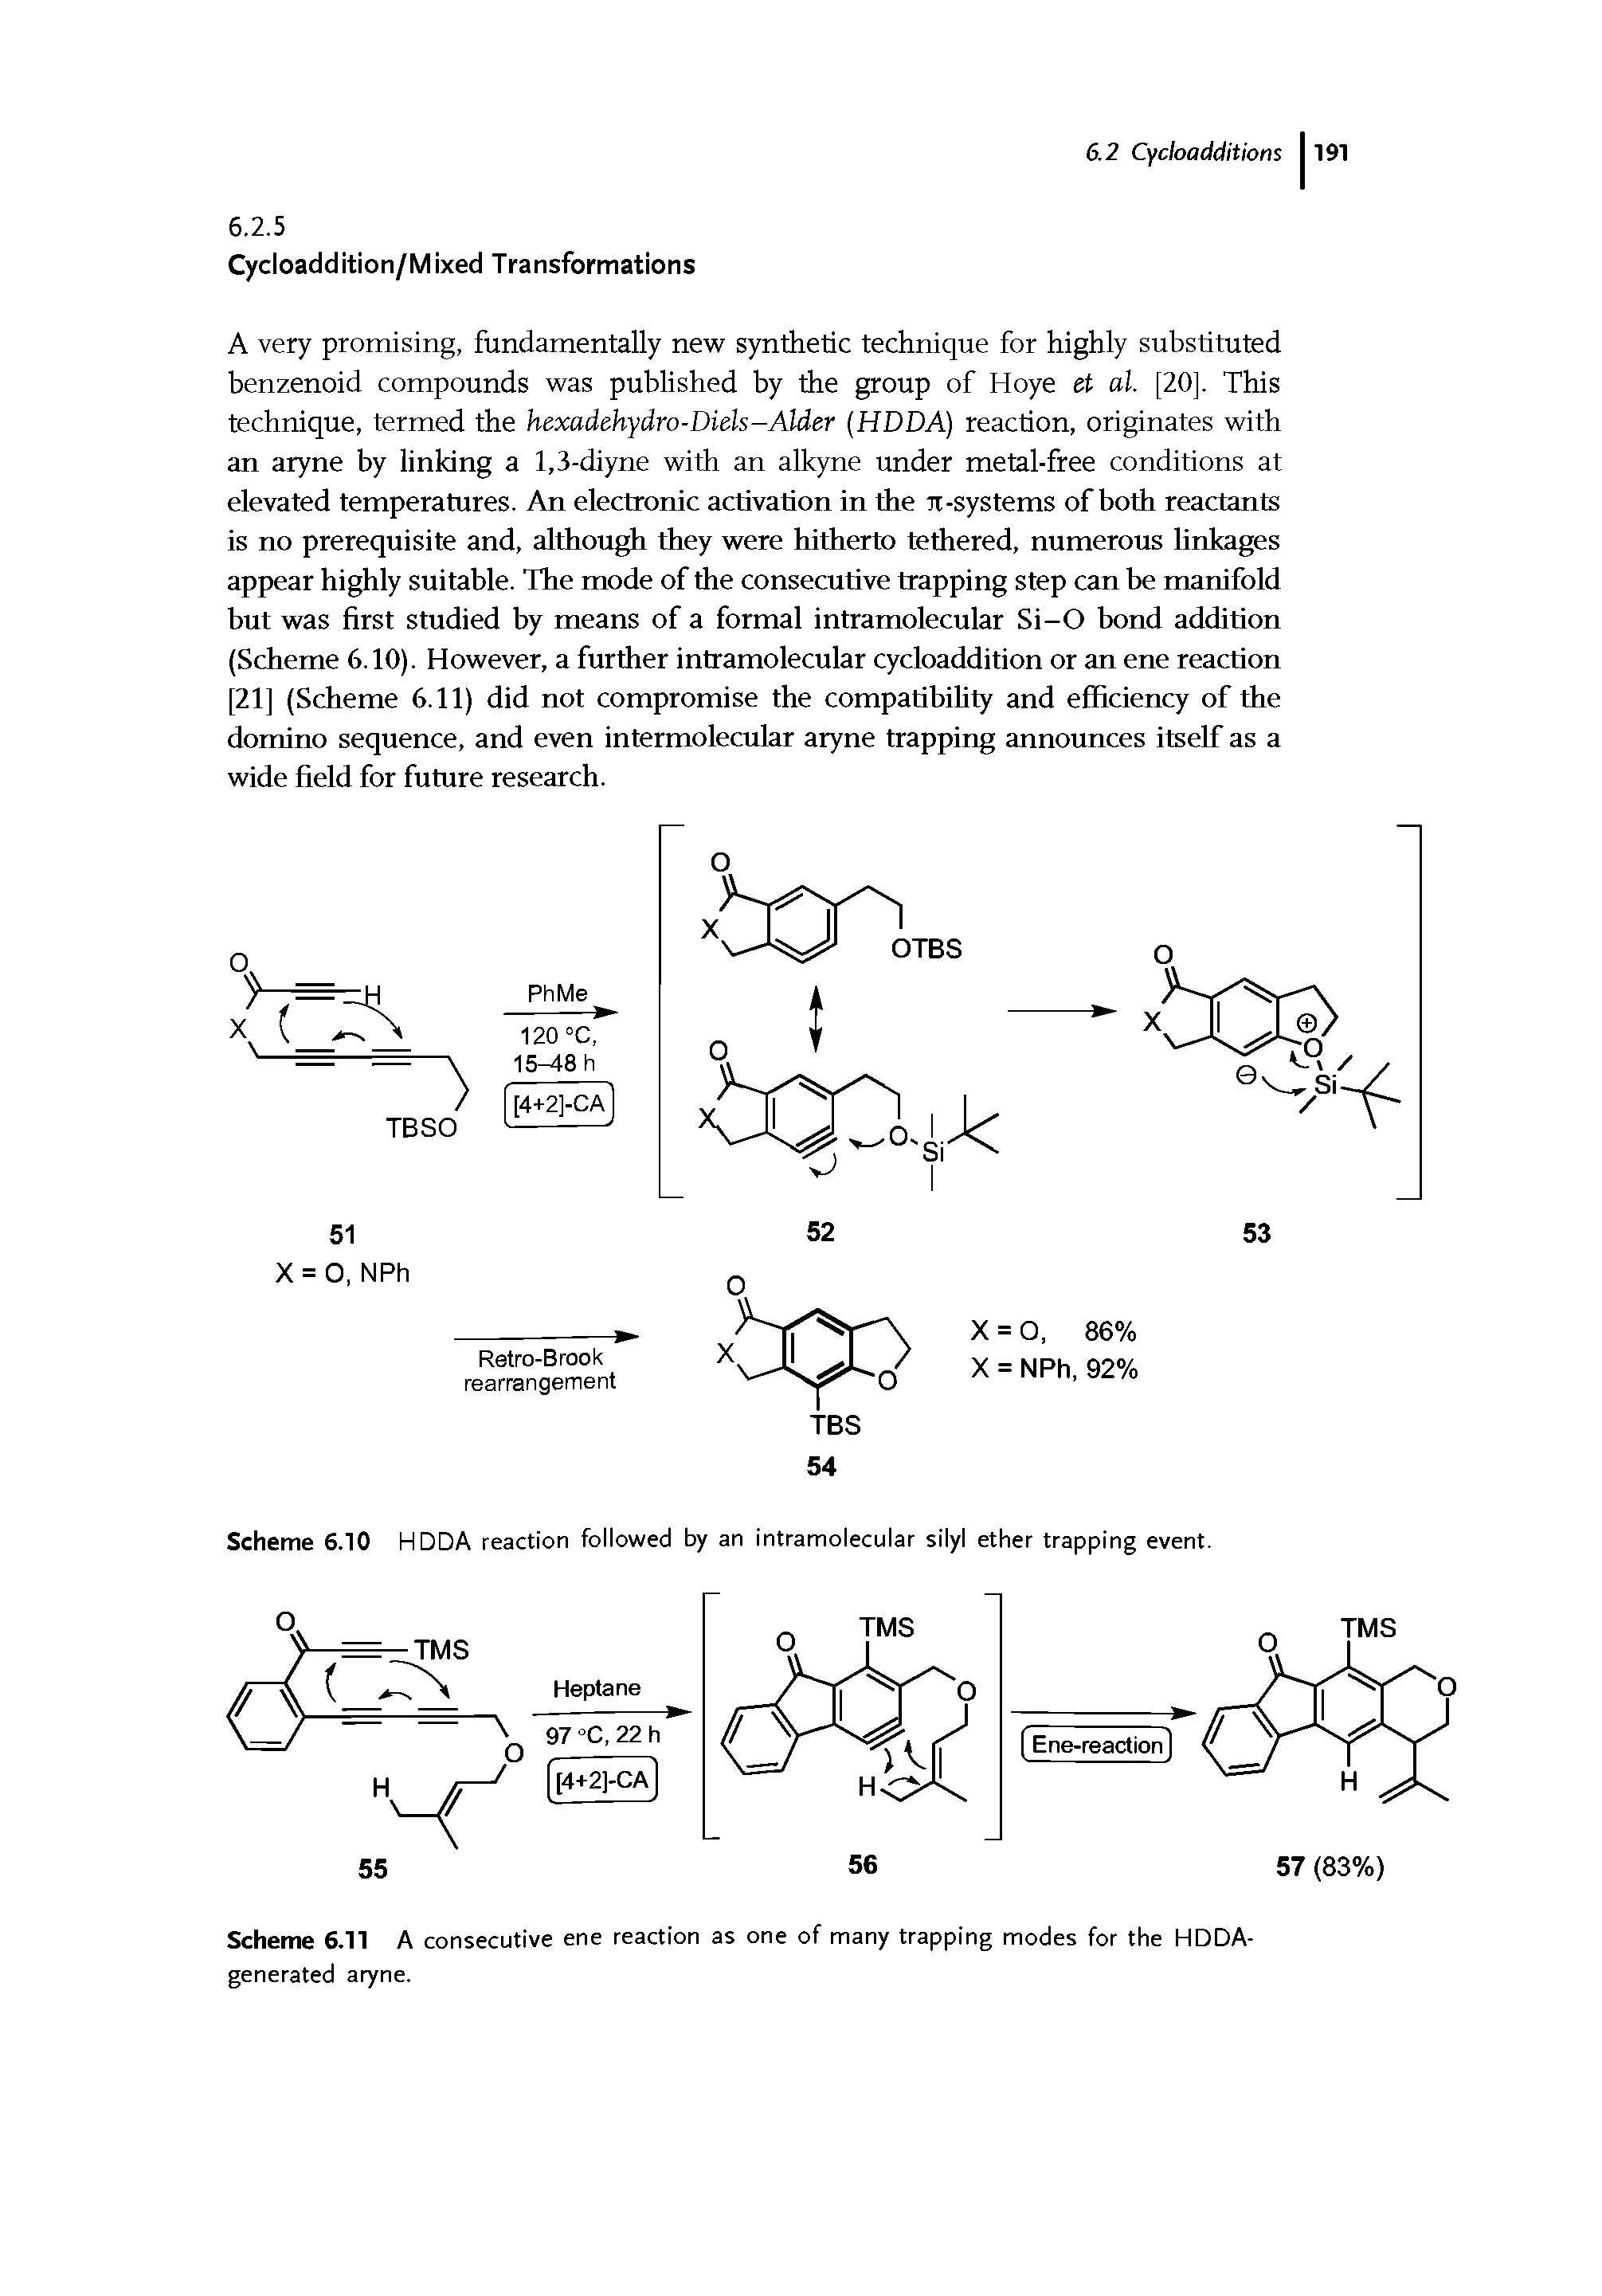 Scheme 6.10 HDDA reaction followed by an intramolecular silyl ether trapping event.